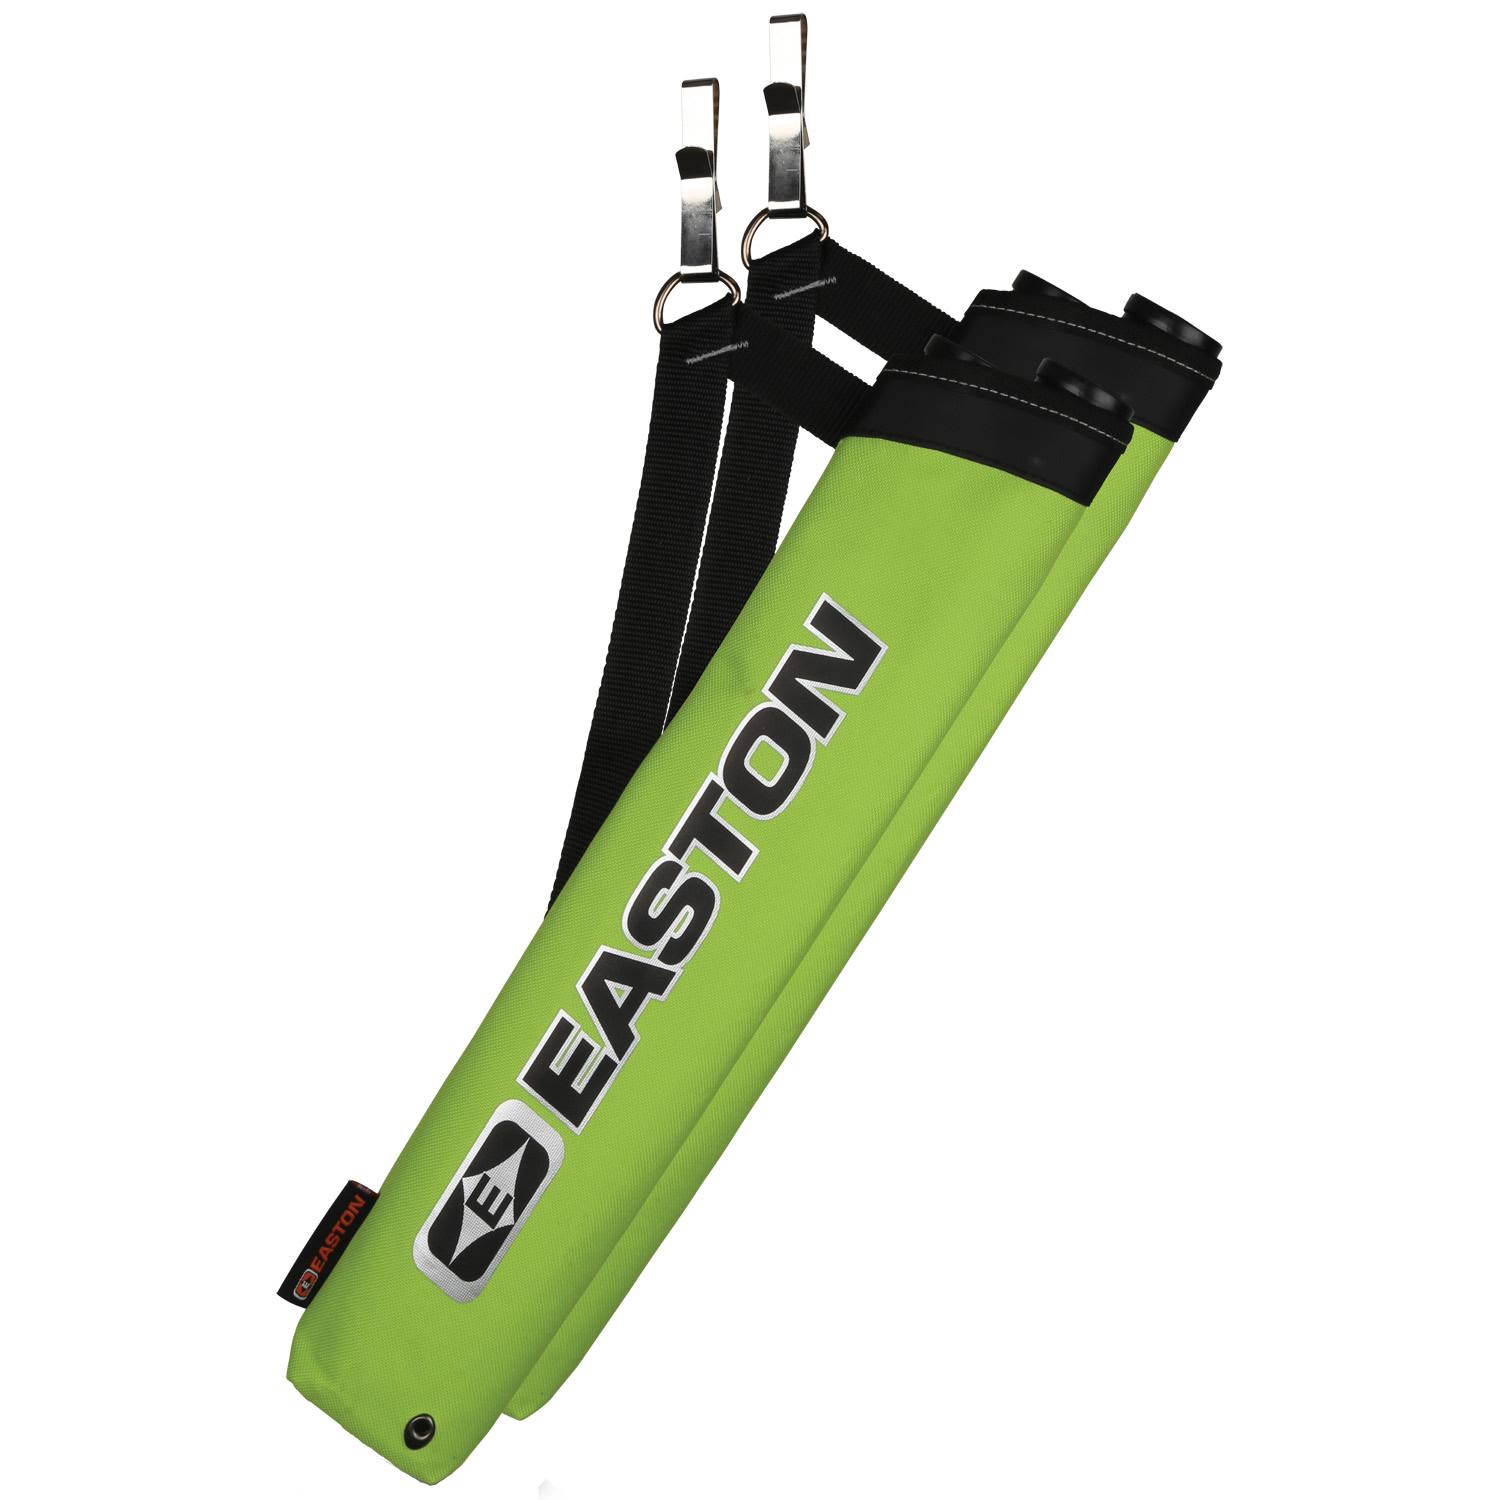 Easton 2 Tube Flipside Quiver - Neon Green, Right Hand and Left Hand